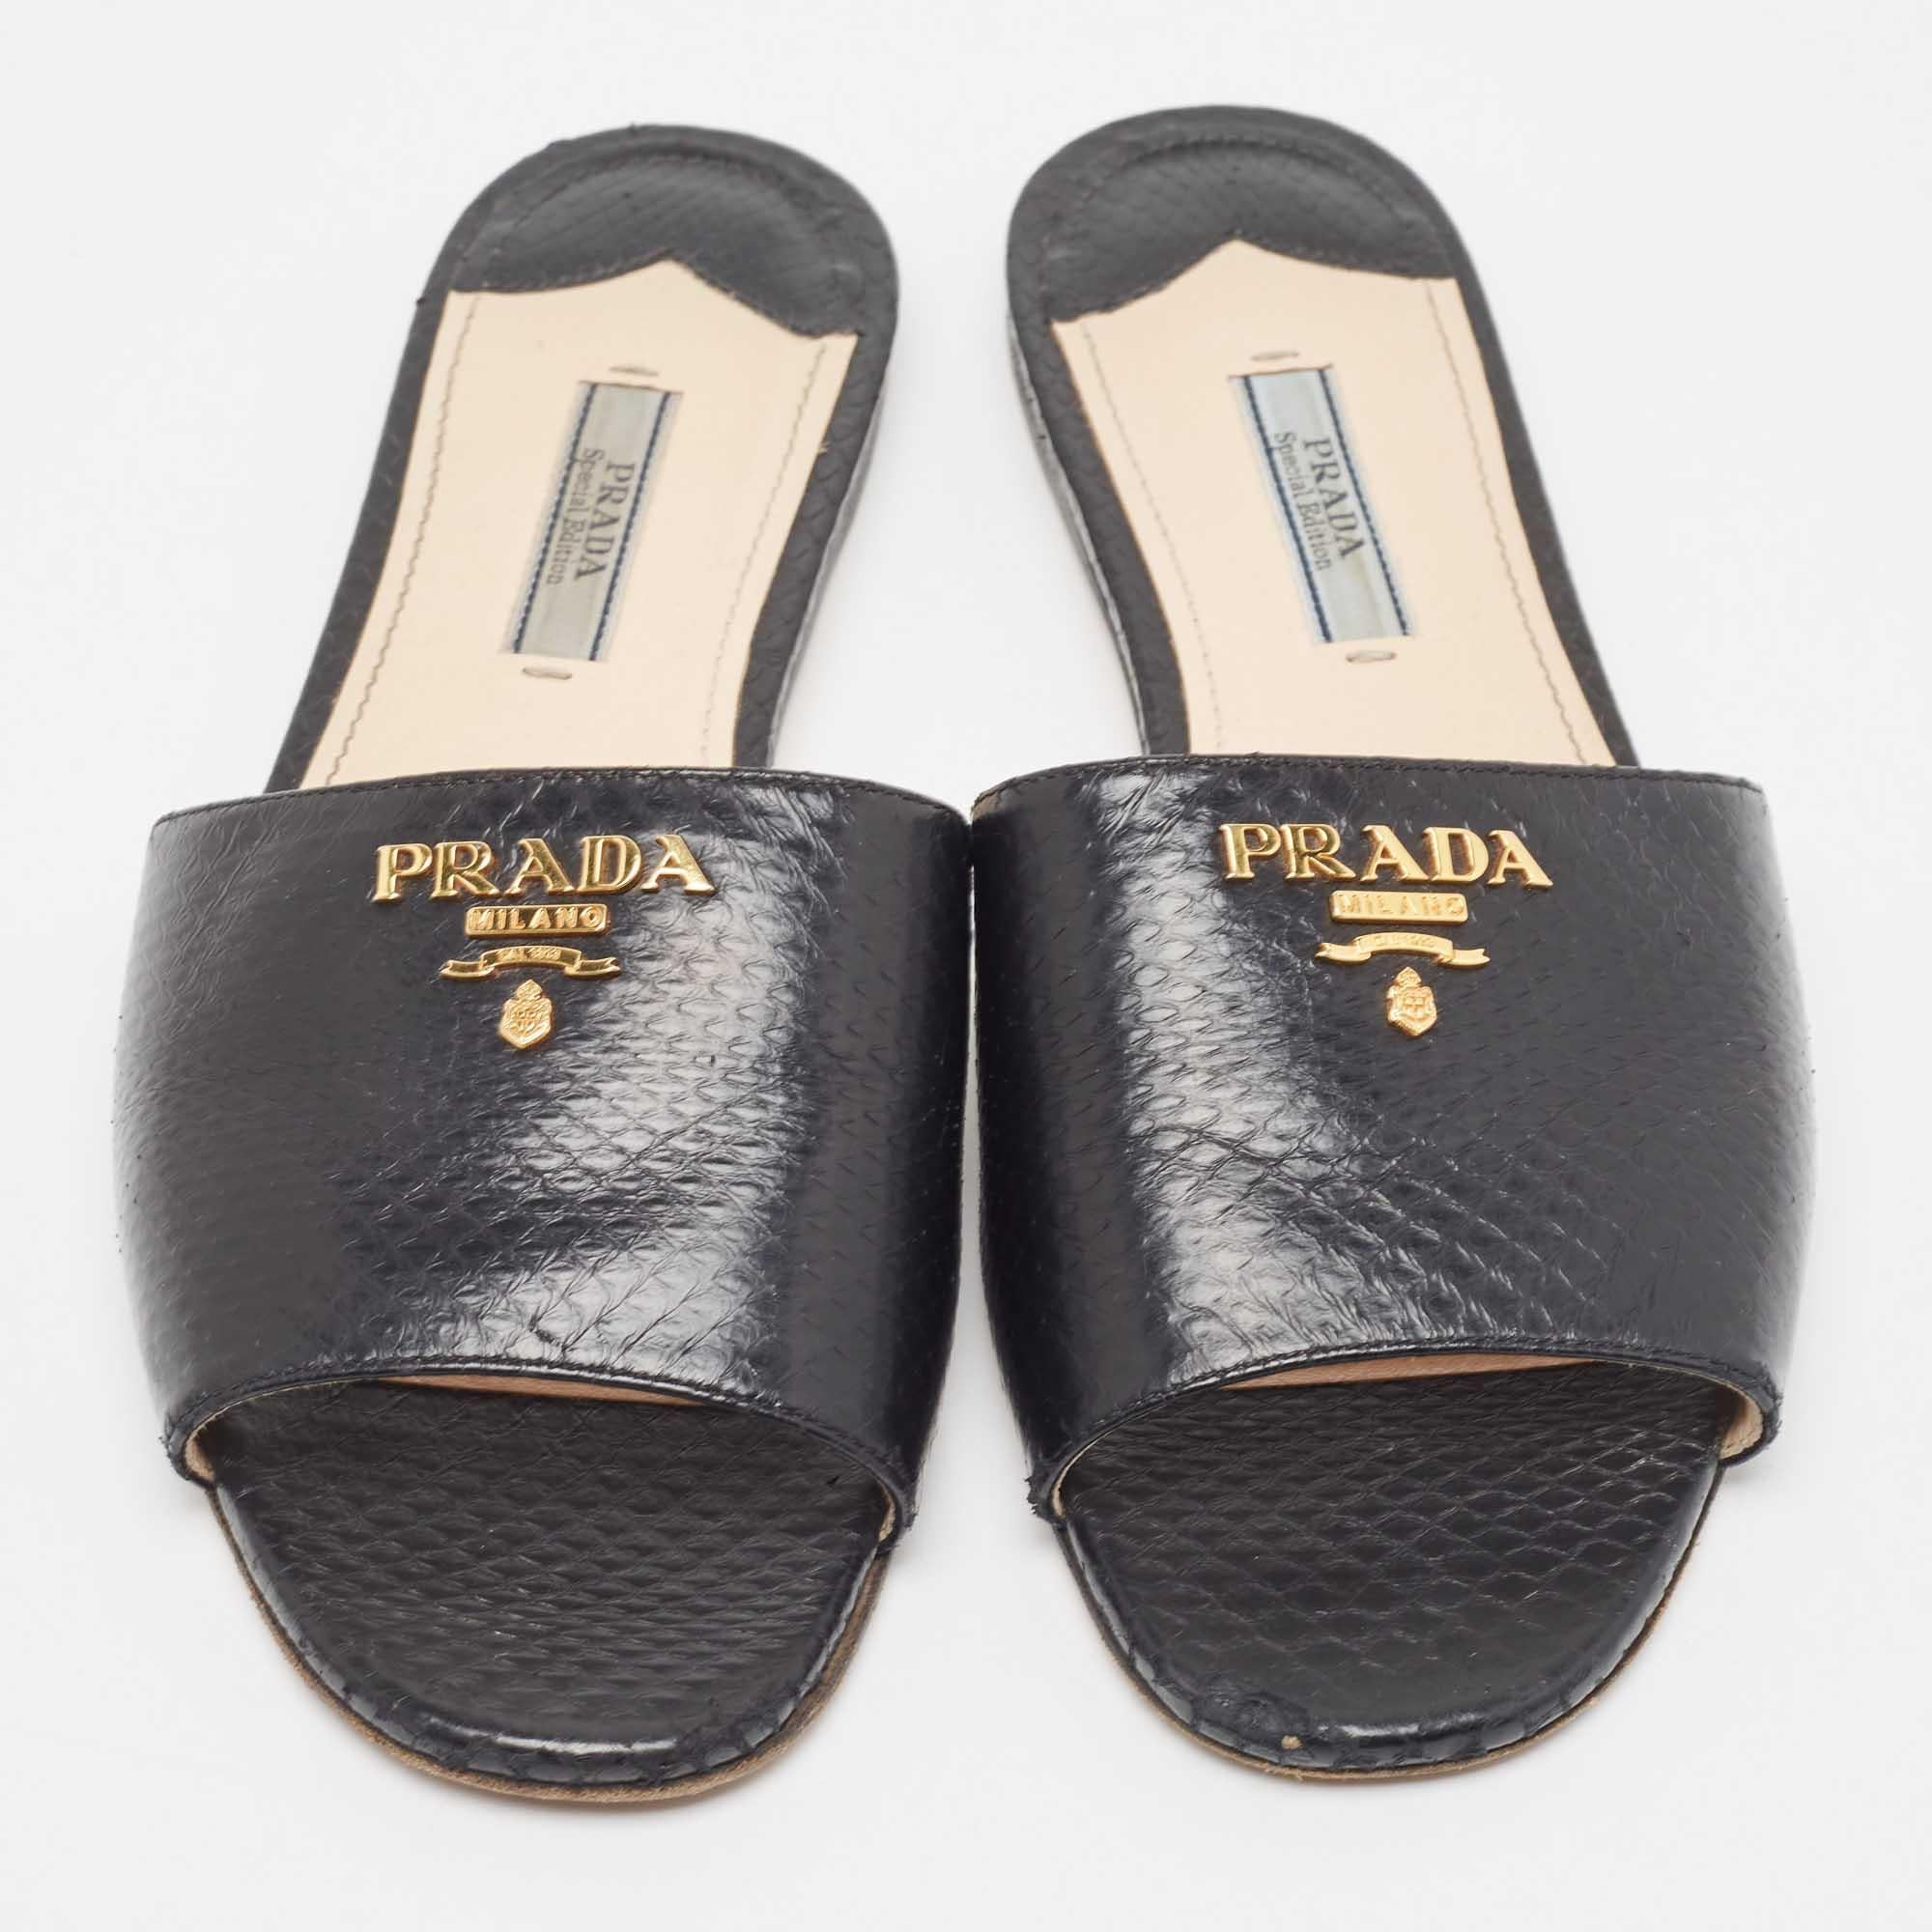 These sandals will frame your feet in an elegant manner. Crafted from quality materials, they display a classy design and comfortable insoles.

Includes: Original Dustbag

